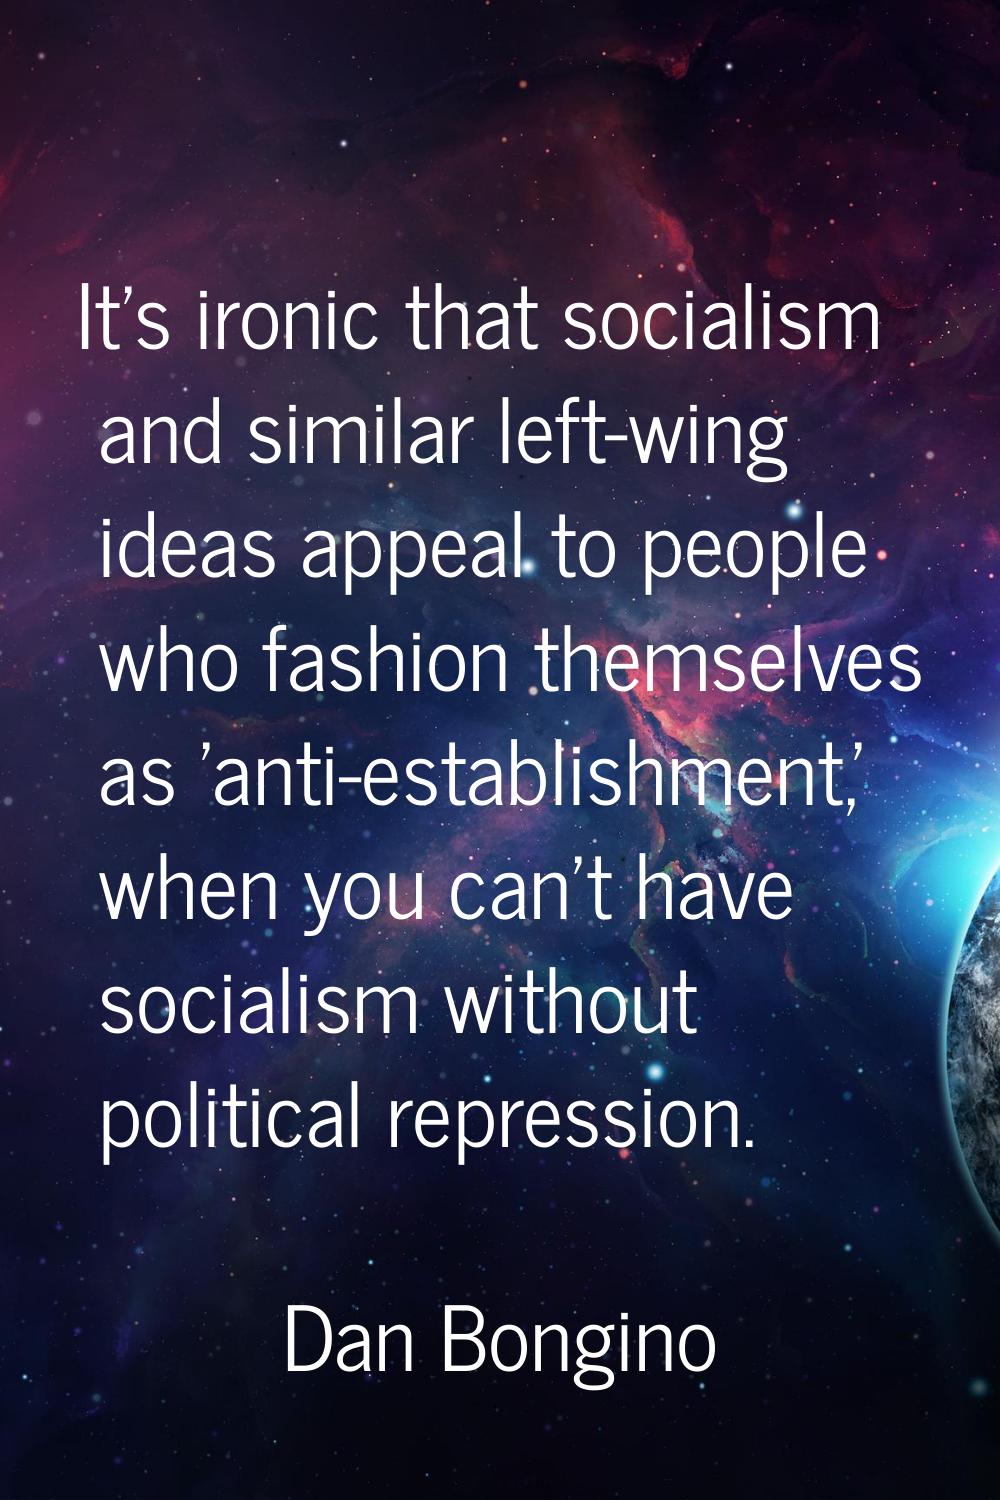 It's ironic that socialism and similar left-wing ideas appeal to people who fashion themselves as '